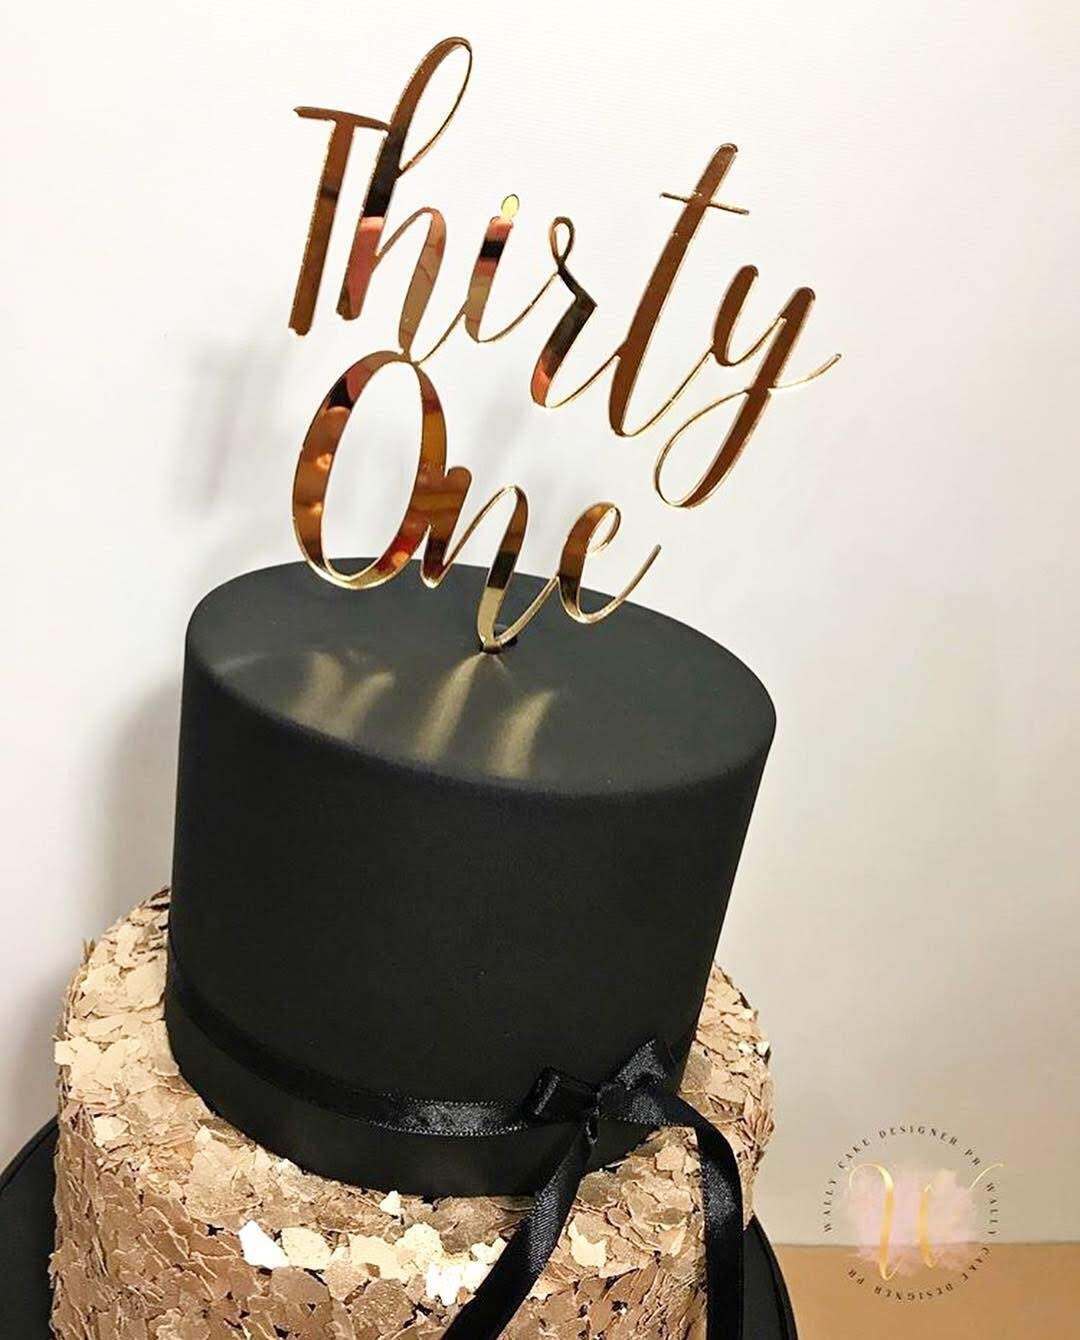 Happy 30th birthday Cake Topper - Rose Gold 30th birthday cake topper, 30th  birthday party decorations, gold 30th birthday cake topper，30 birthday cake  topper for women/men,30 birthday cake topper - Yahoo Shopping